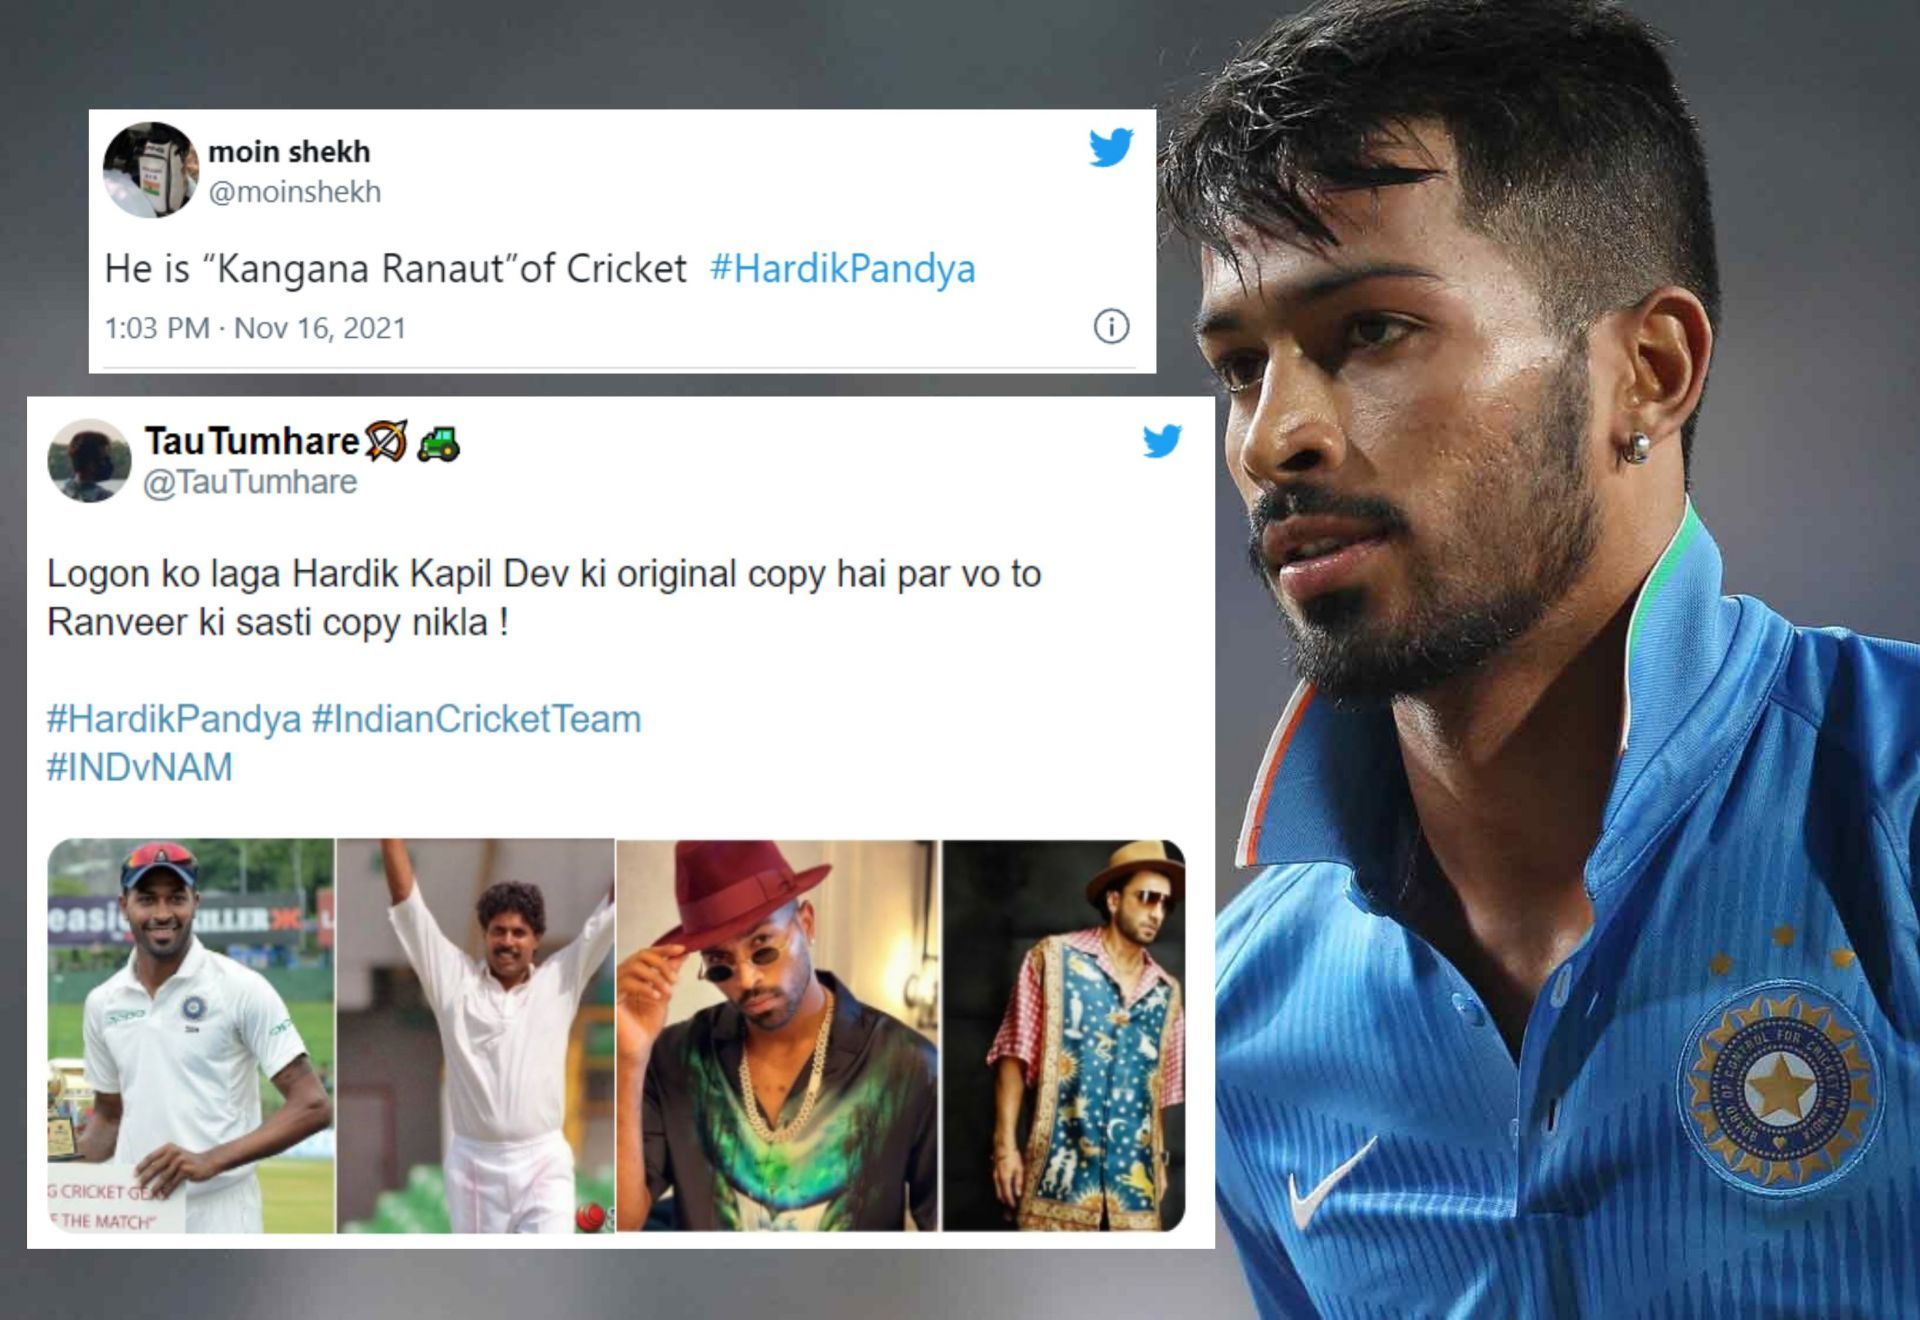 Fans slam the all-rounder for his recent controversies.